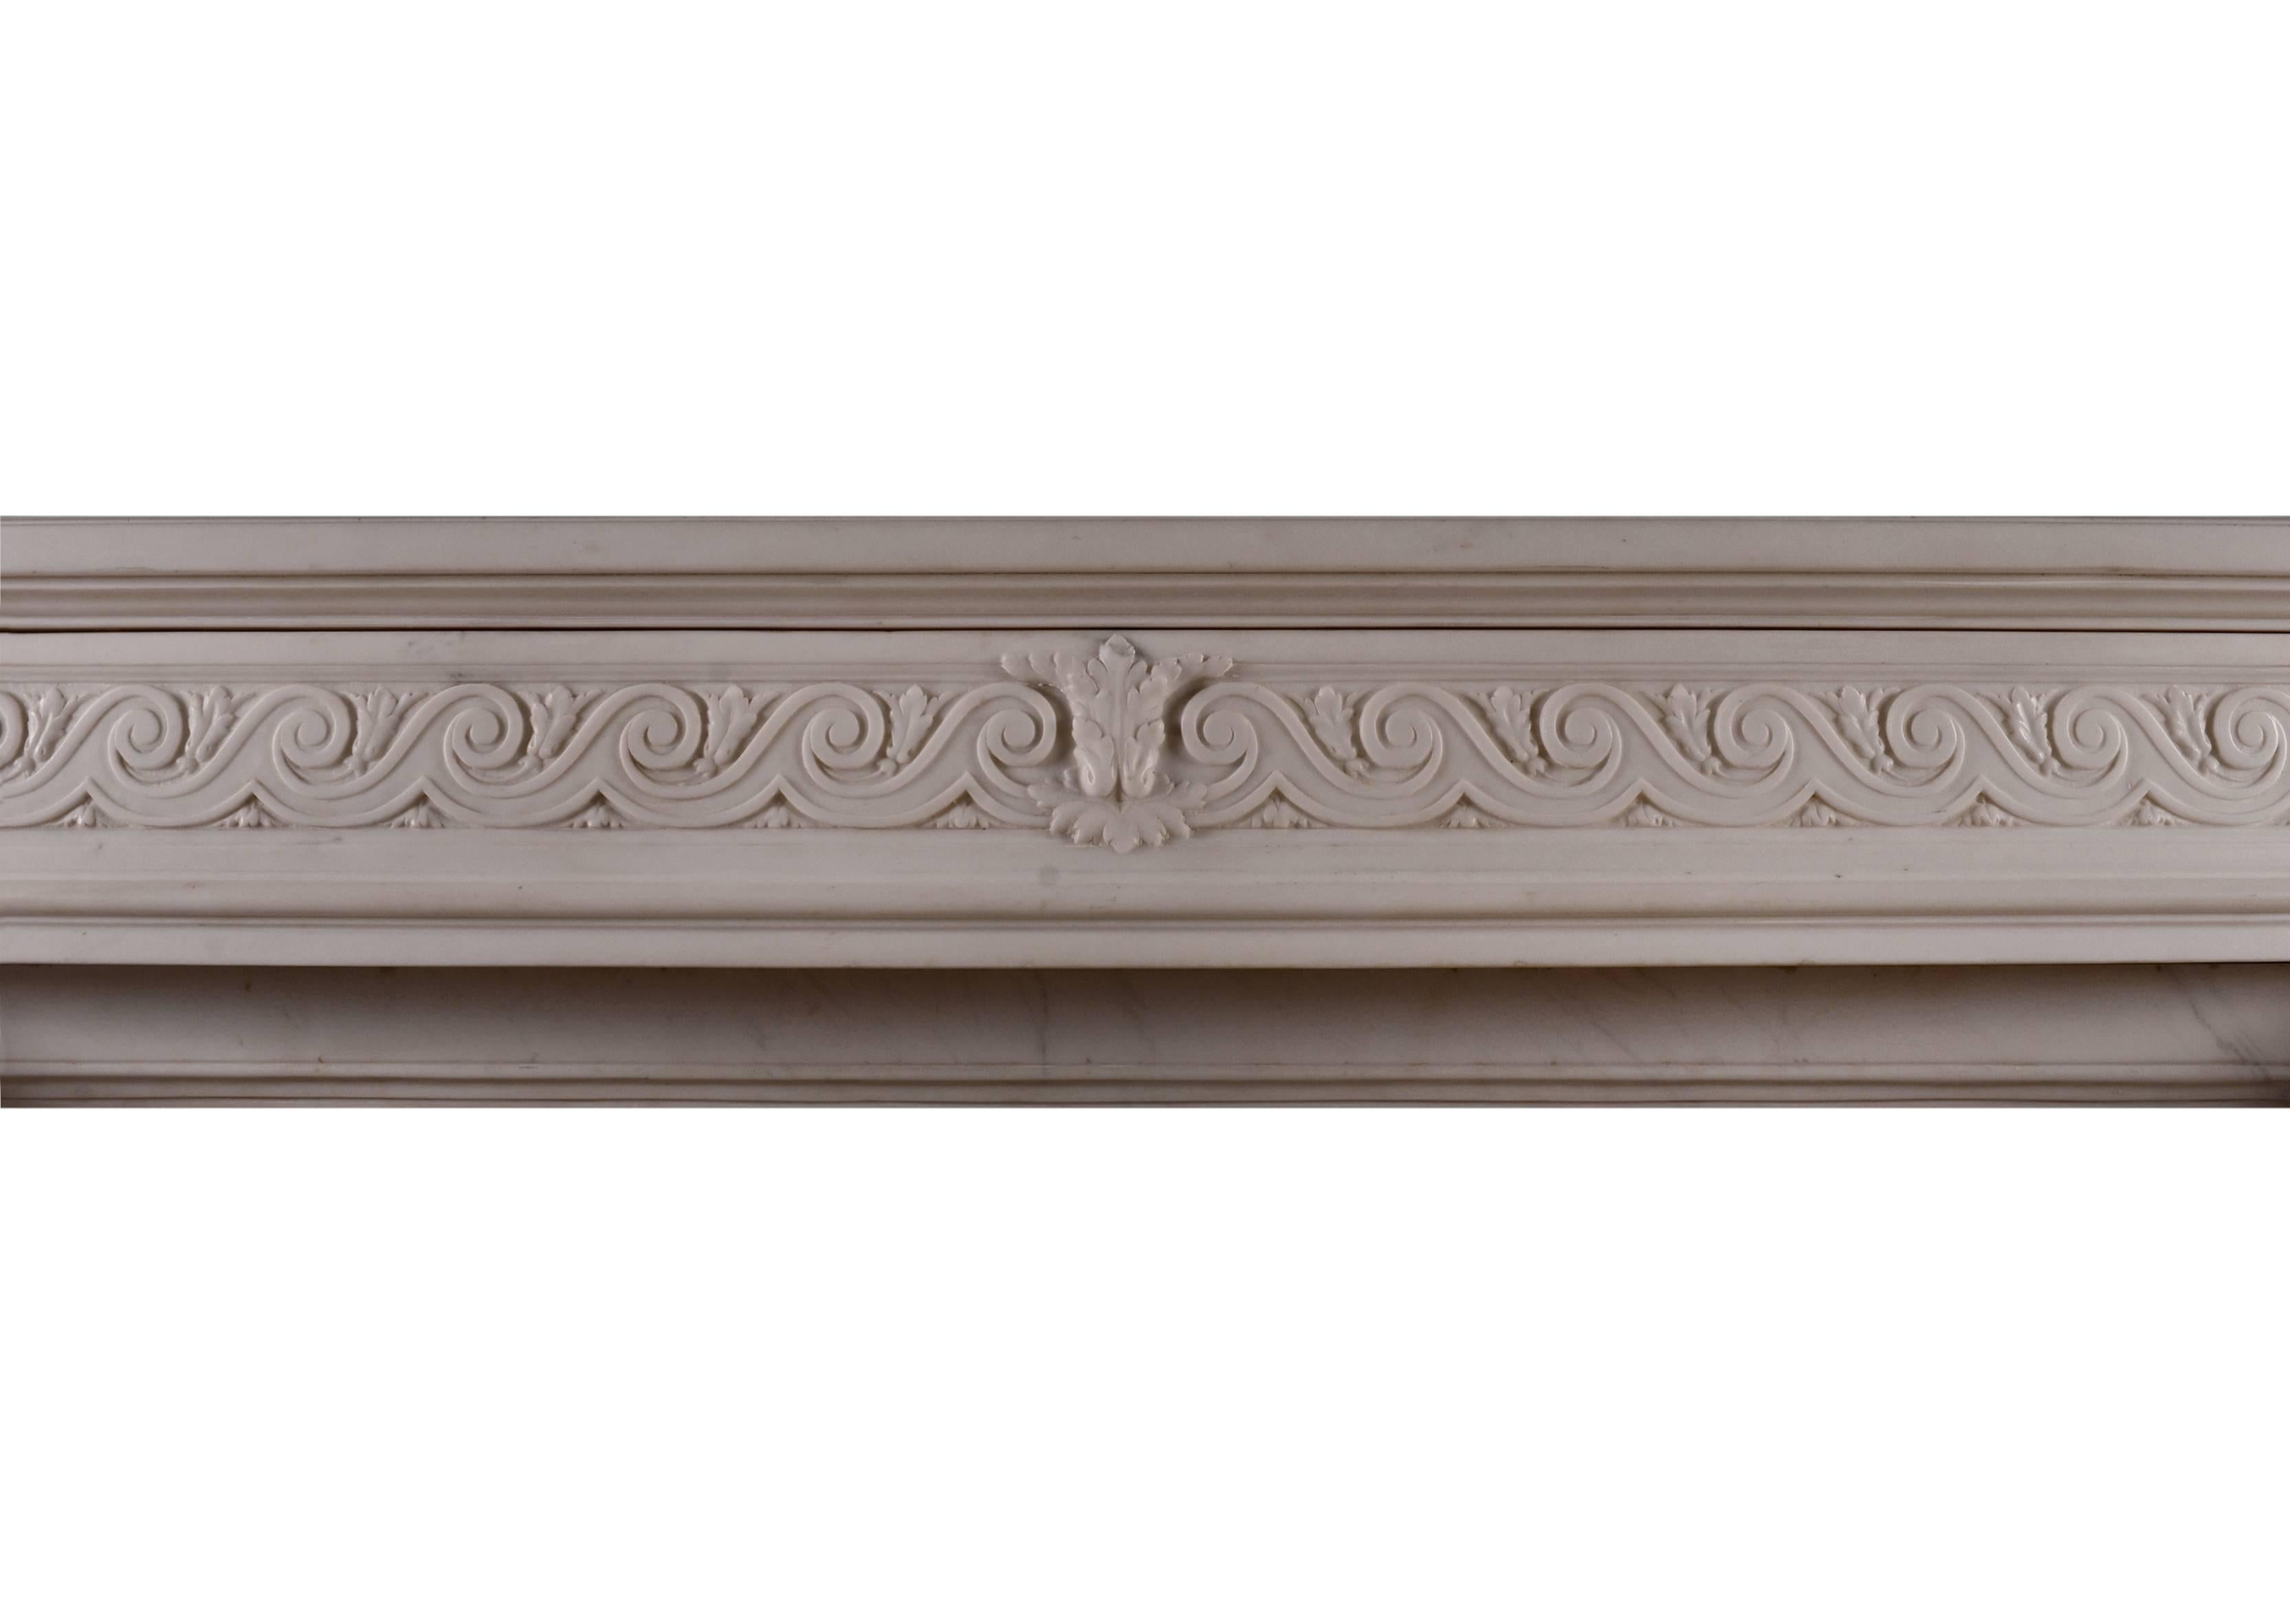 An elegant and good quality 19th century (circa 1840) French Louis XVI Statuary marble fireplace, with bowed frieze with guilloche carving. Round paterae above shaped jambs. Shelf length at wall line 62.75 in


Measure: 
Shelf width: 1640 mm / 64